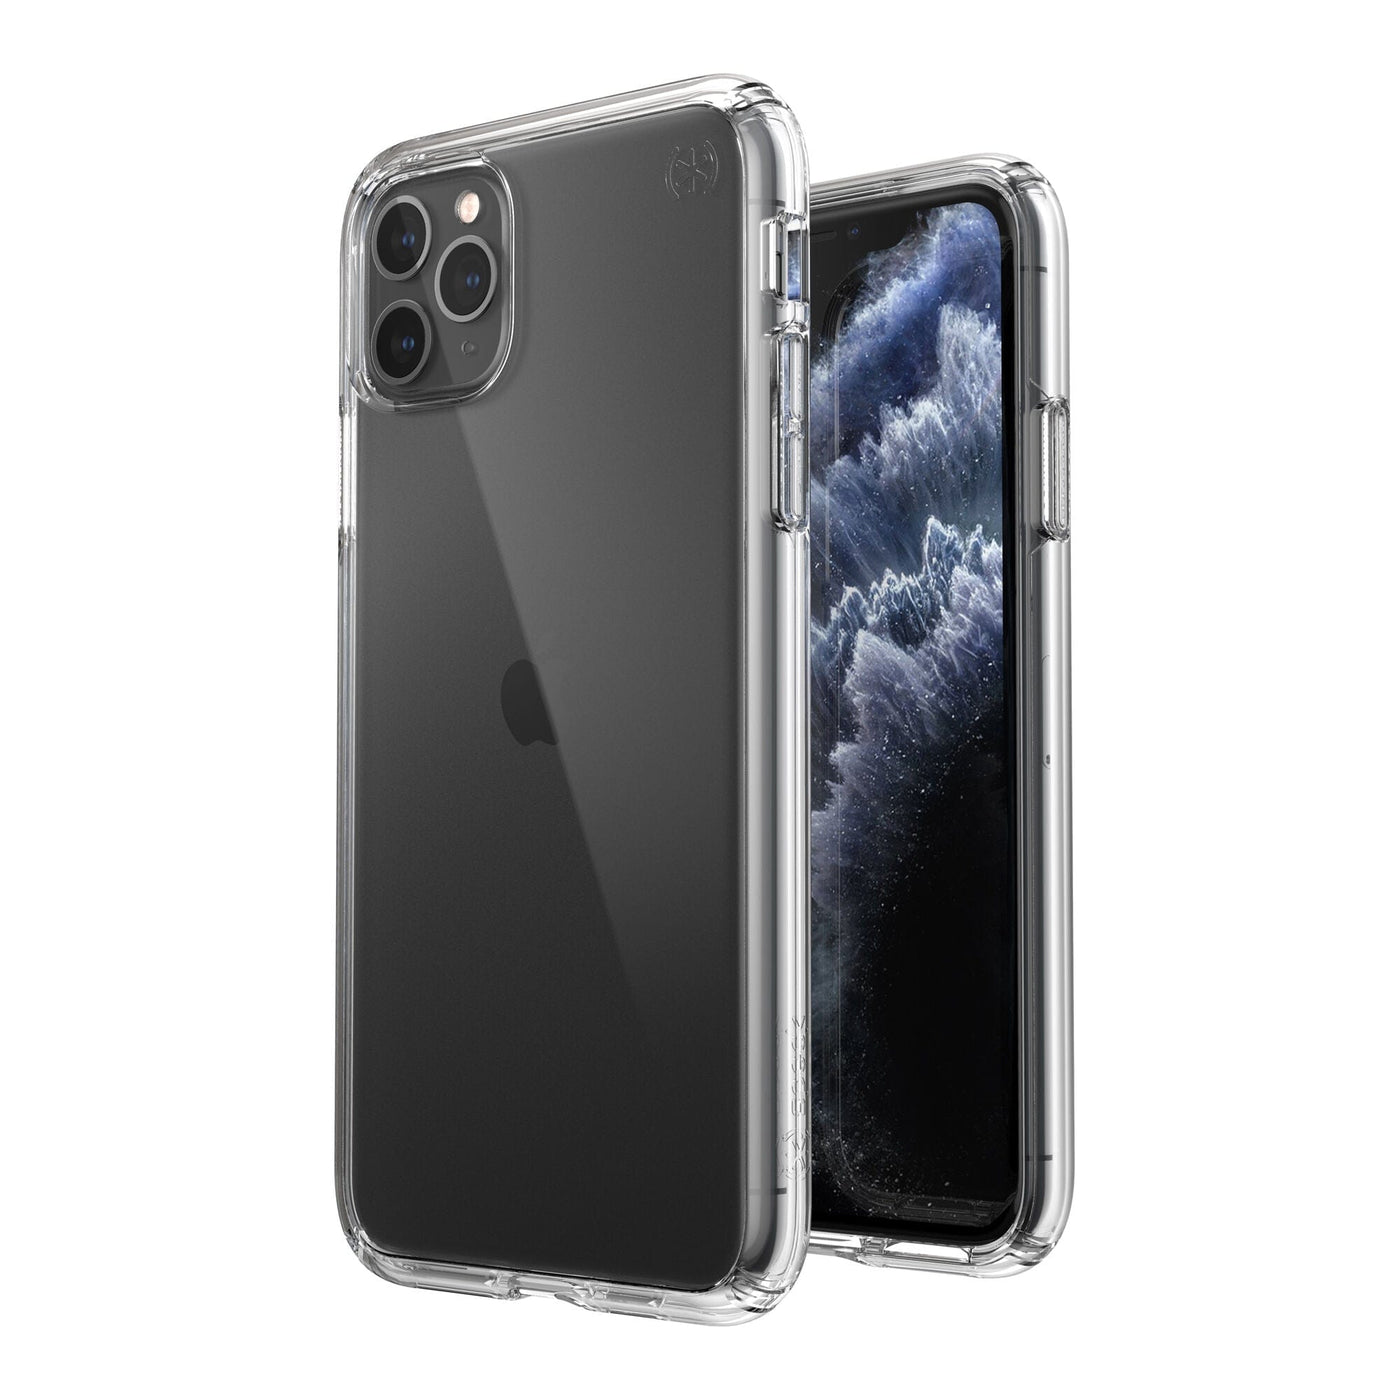 Speck Presidio Perfect-Clear iPhone 11 Pro Max Cases Best iPhone 11 Pro Max  - $39.99